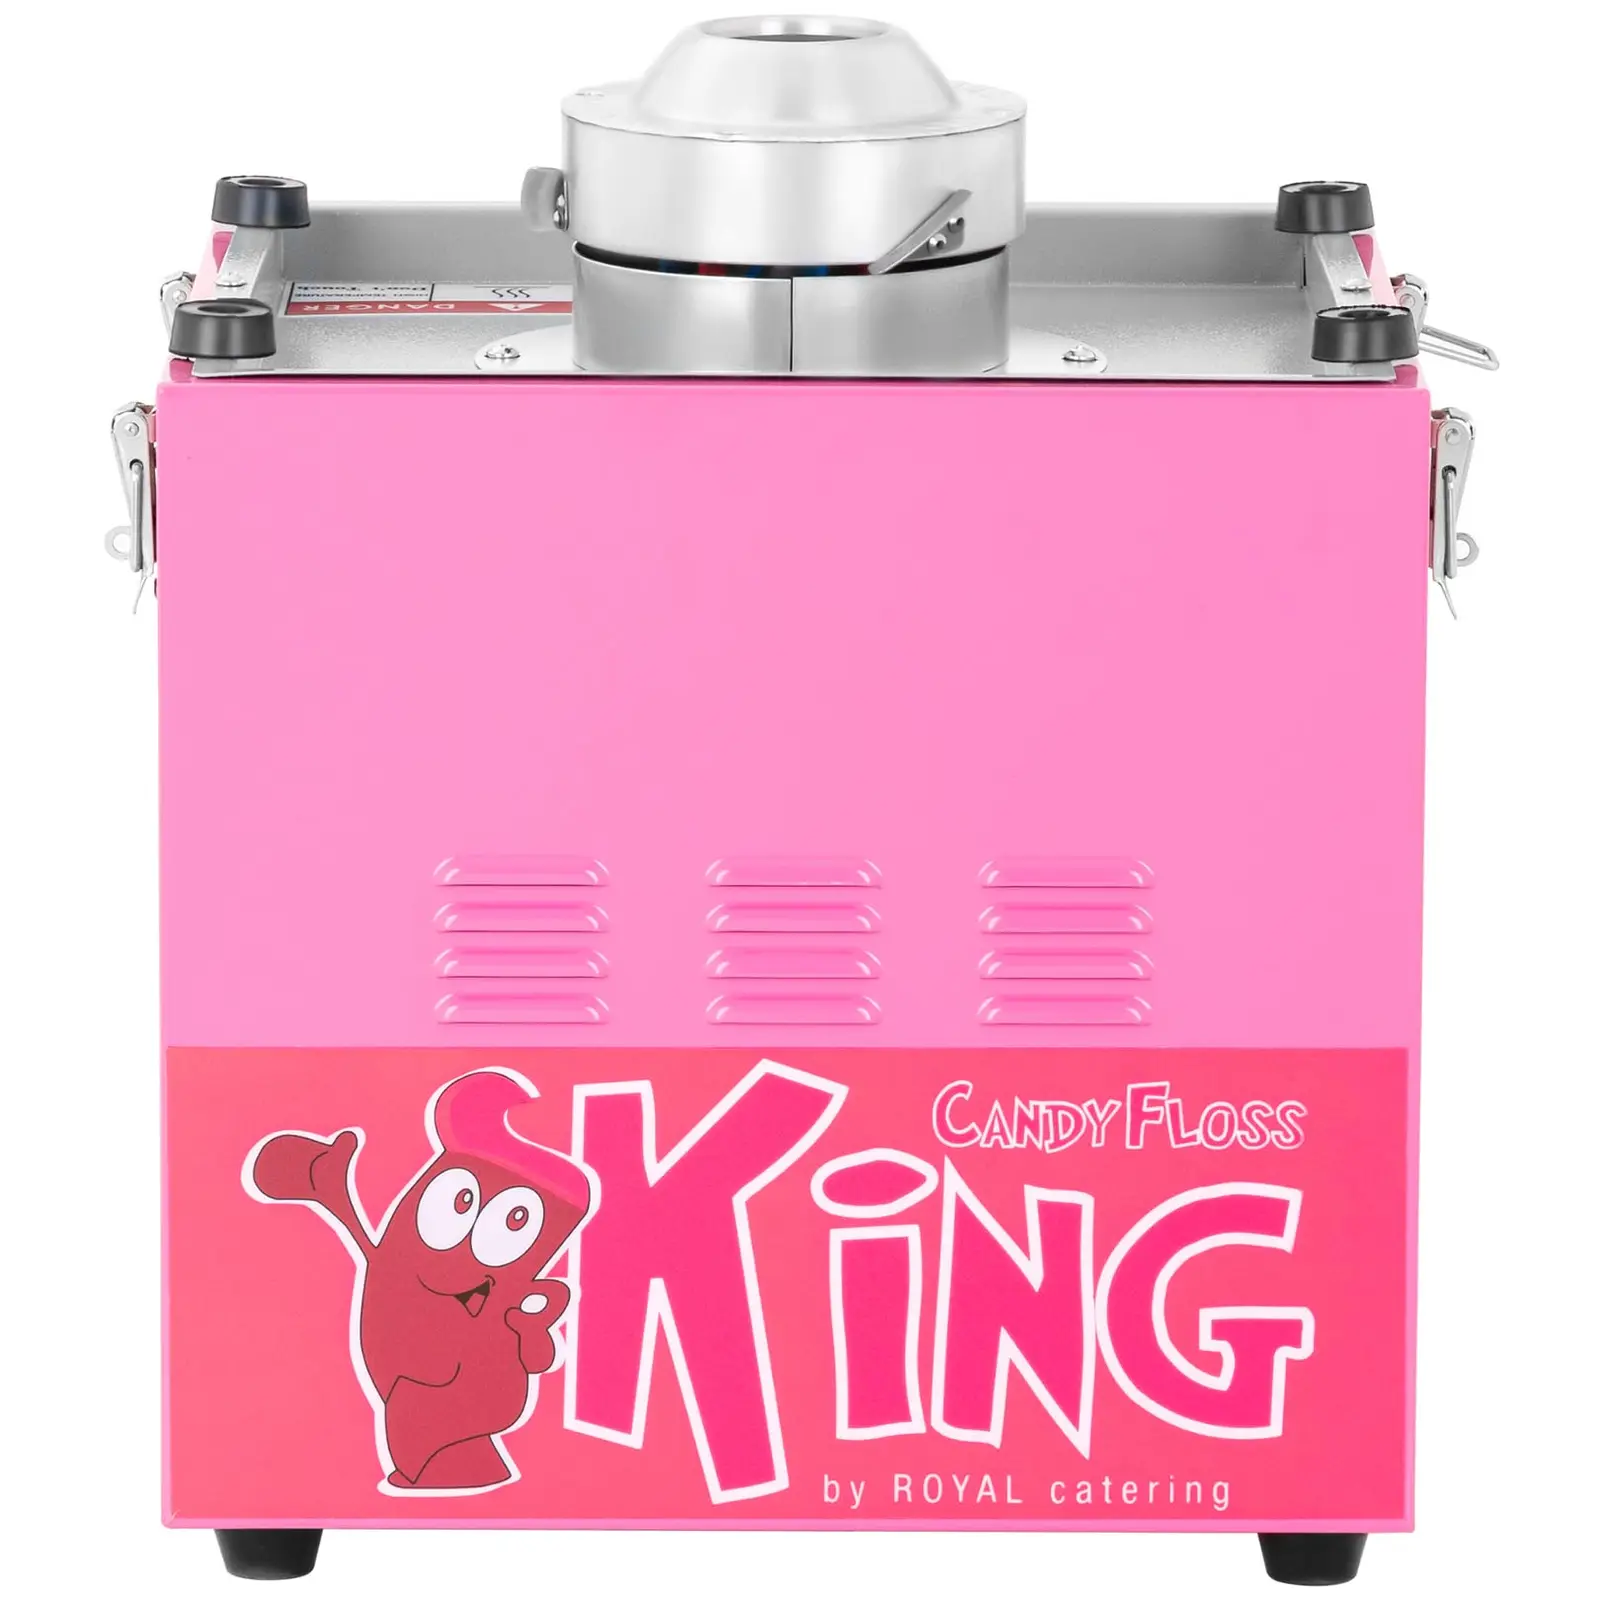 Commercial Candy Floss Machine - 52 cm - 1200 W - Spit Protection